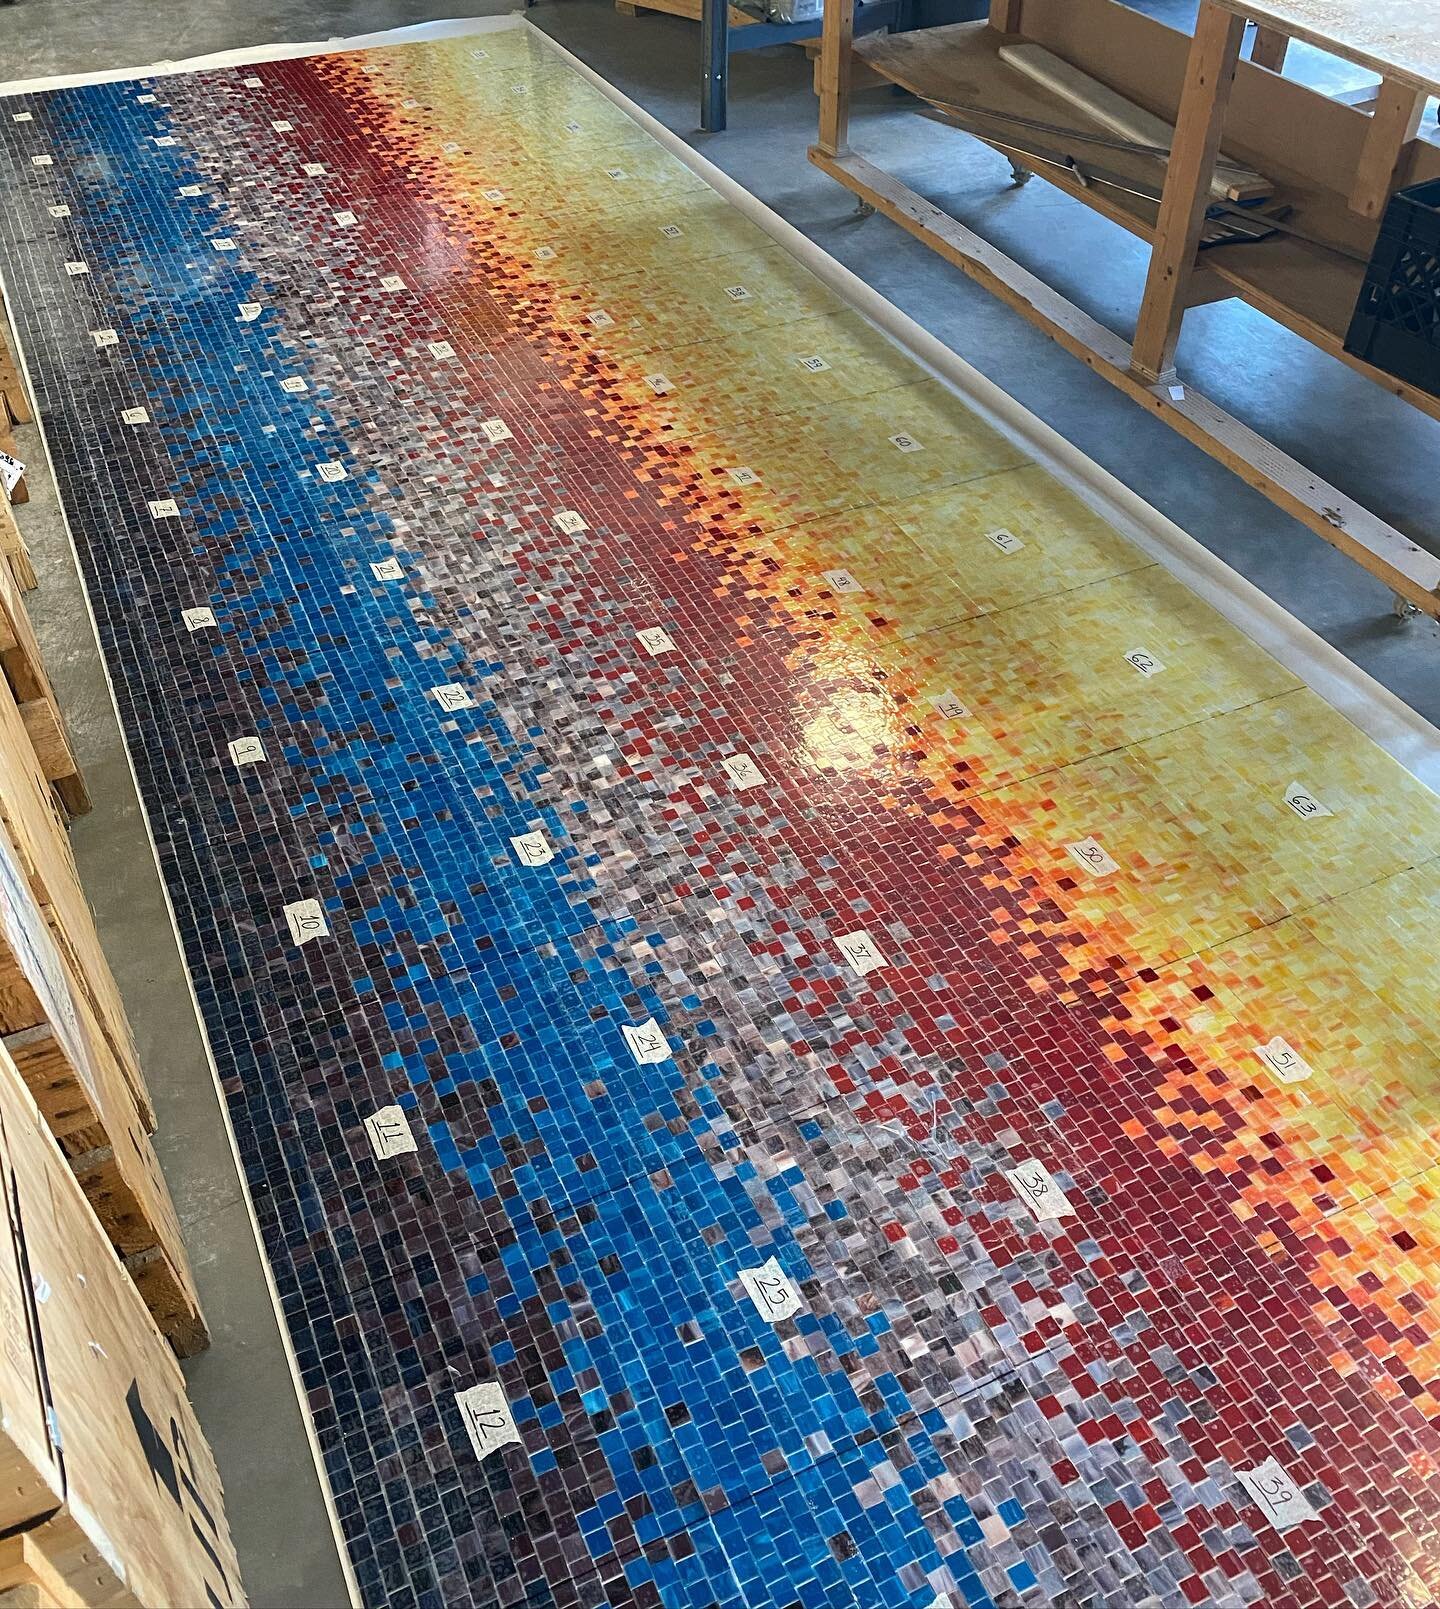 Putting the finishing touches on our Fades pattern before shipping to our lucky client.

#mixedupmosaic #mosaics #madebyhand
#stainedglass #homespa #customdesign 
#pattern #architectualdesign #design #glass #madeinnyc